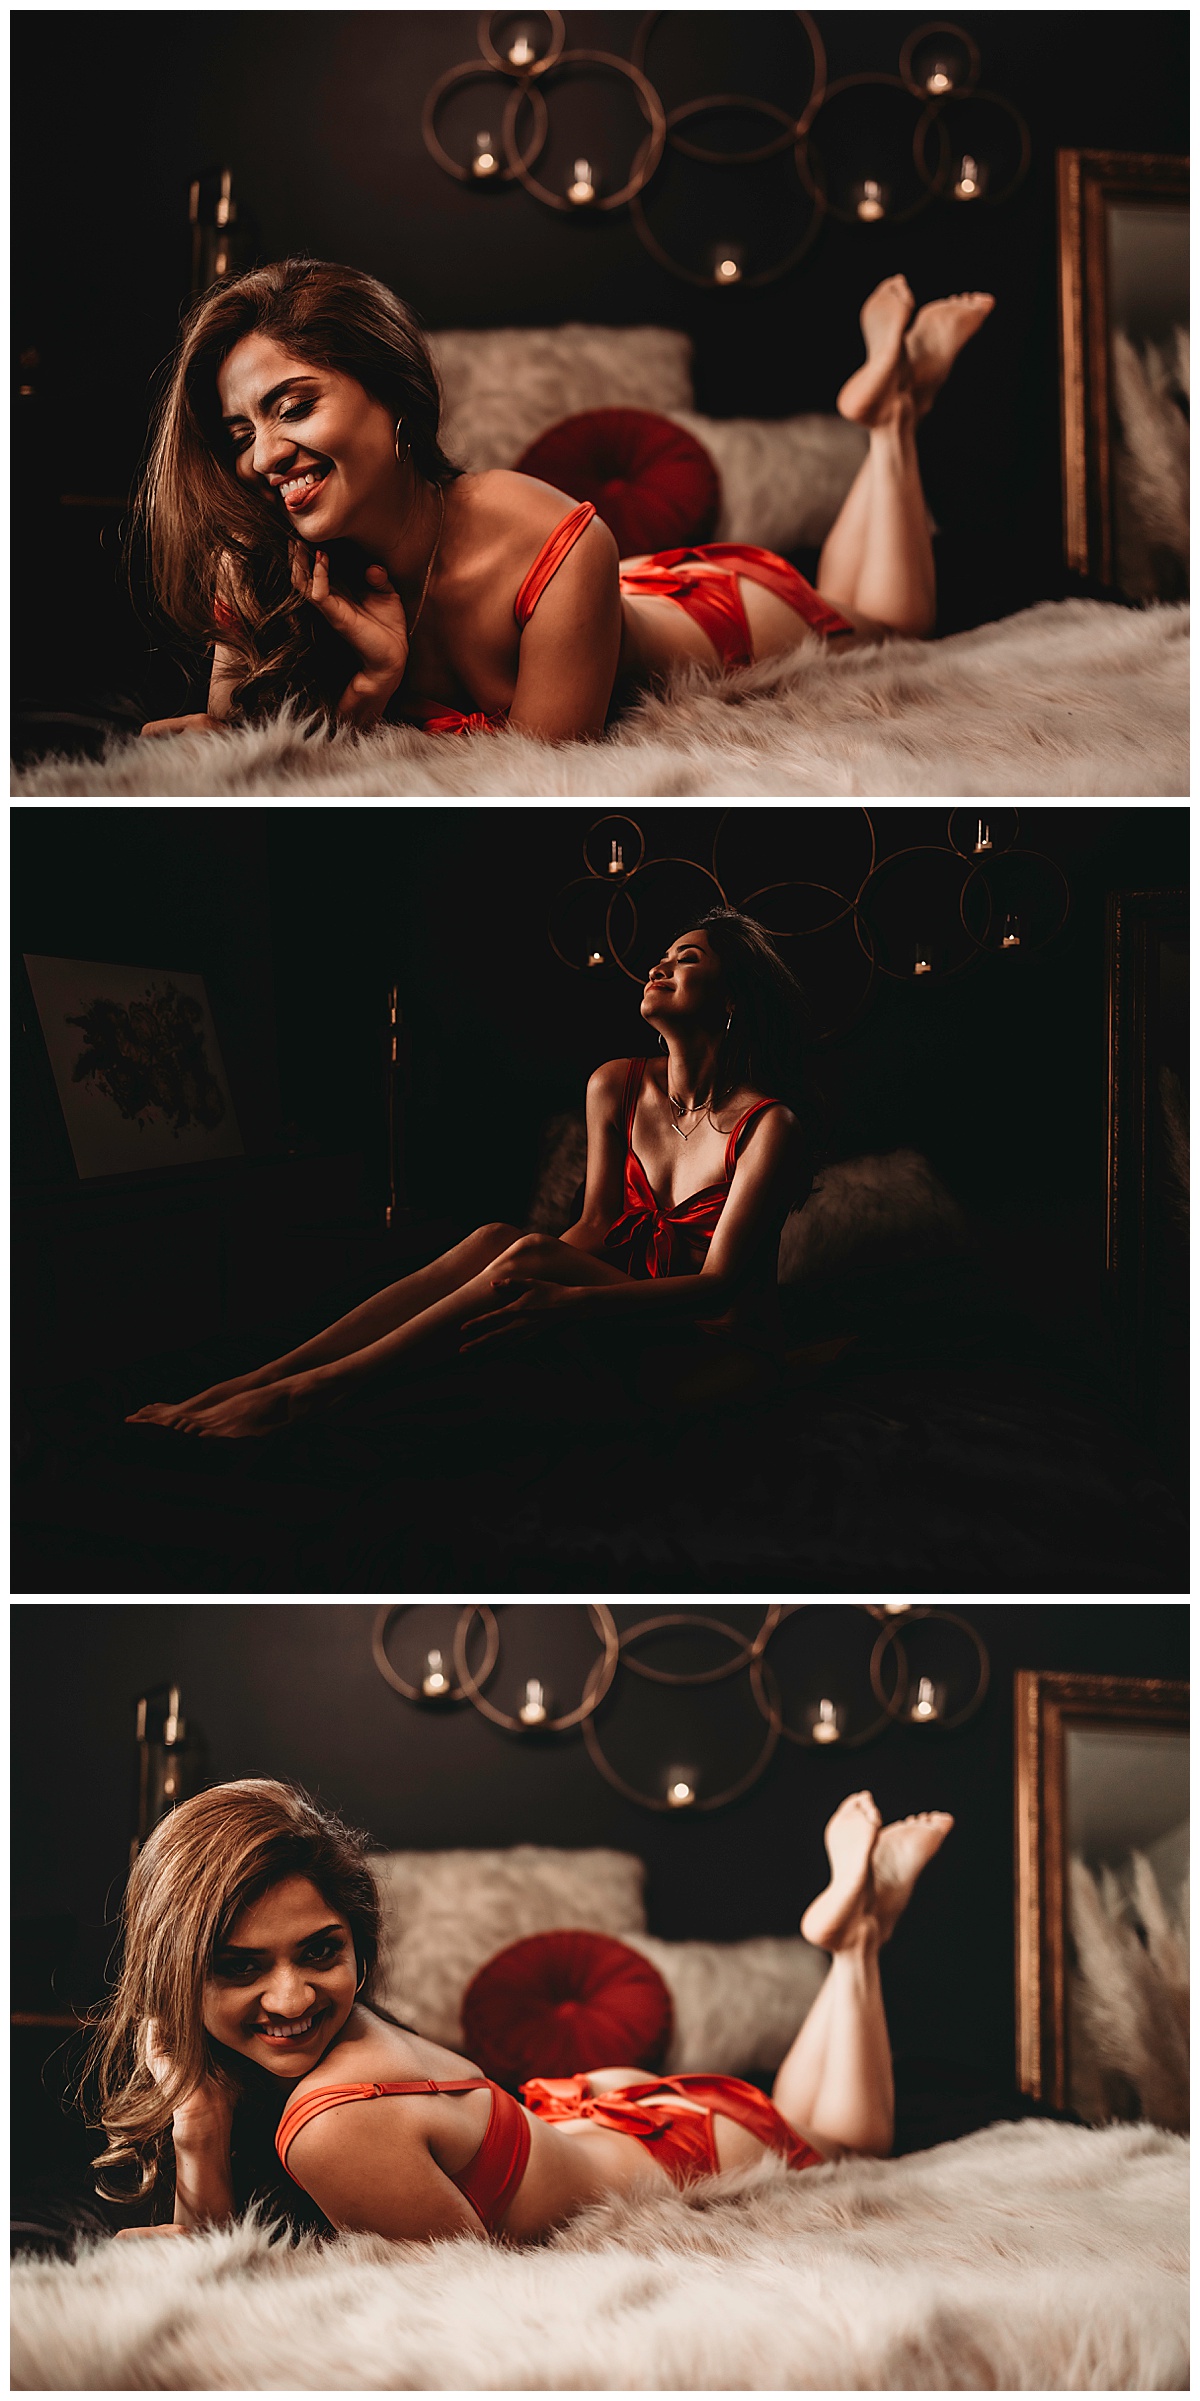 Woman in red lingerie for Boudoir Photography Minnesota